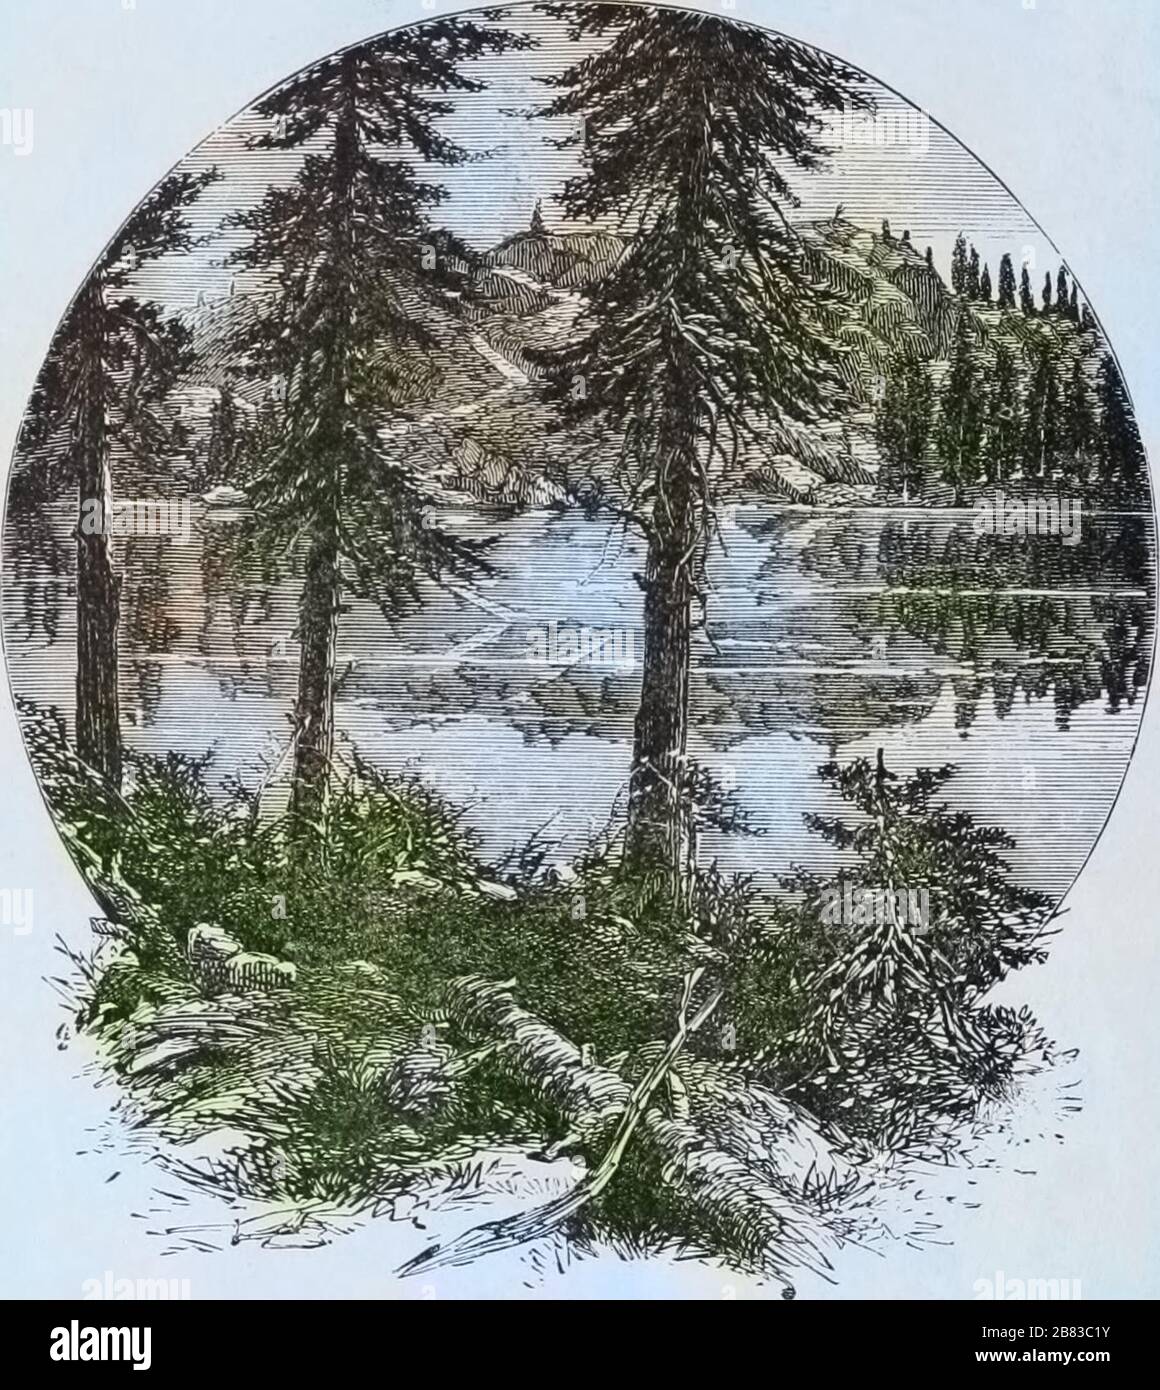 Engraving of the Lake Angeline in Big Horn Mountains, from the book 'The Pacific tourist' by Henry T. Williams, 1878. Courtesy Internet Archive. Note: Image has been digitally colorized using a modern process. Colors may not be period-accurate. () Stock Photo